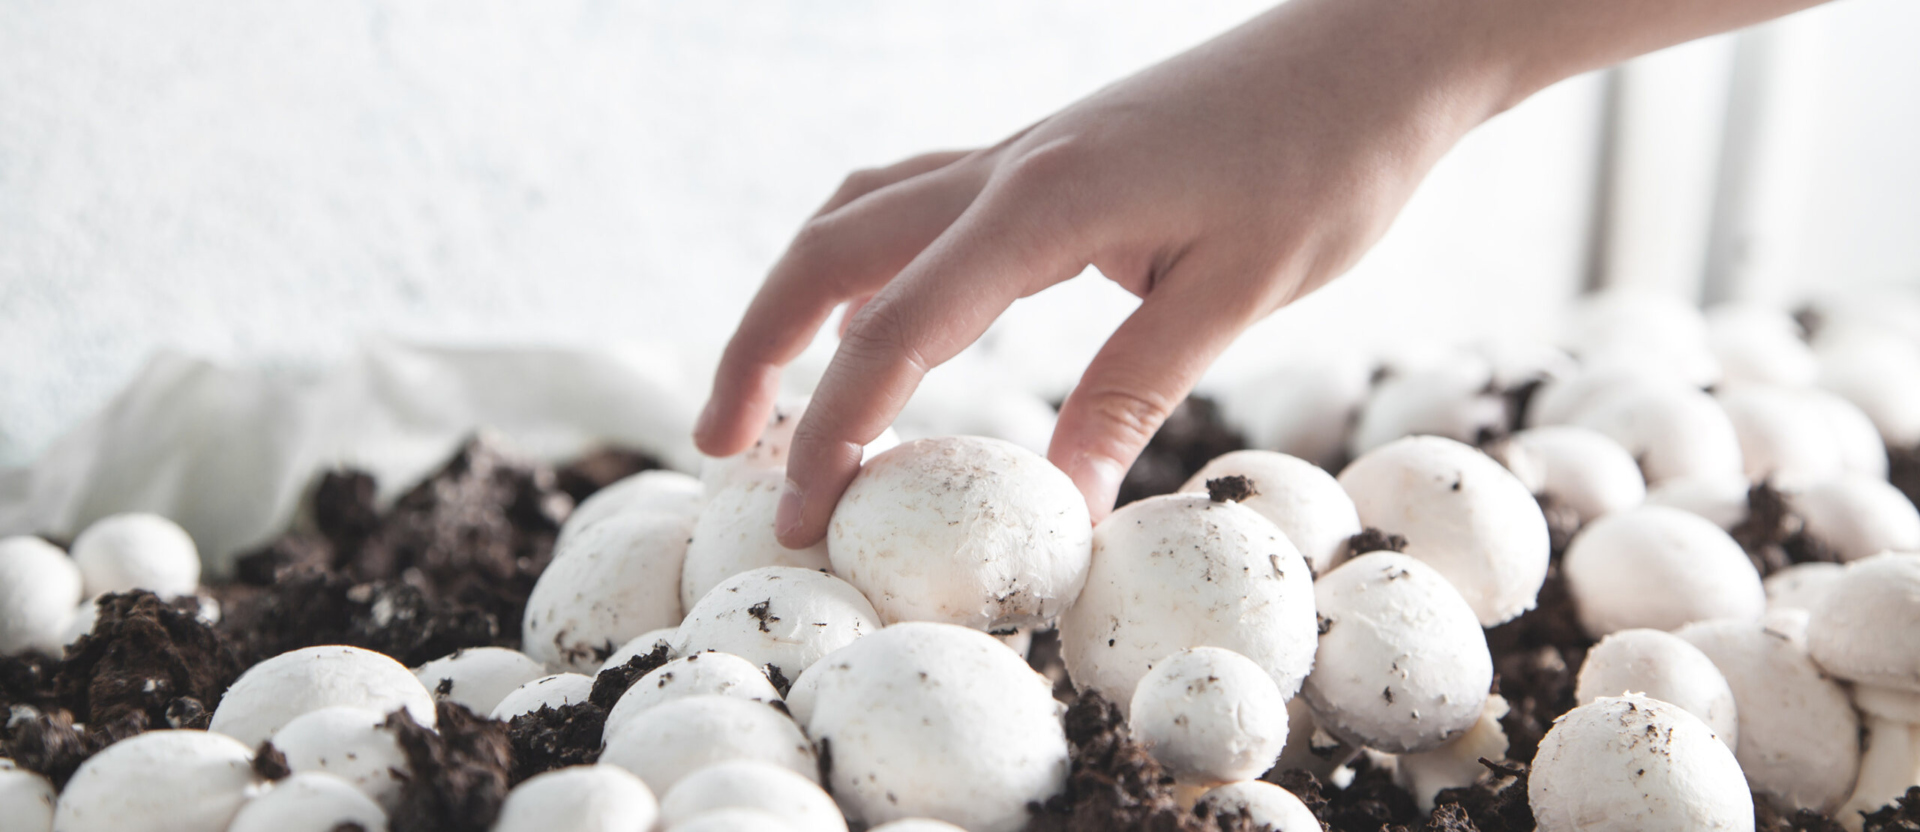 Mushrooms growing in the soil and a hand reaching down to pick them.